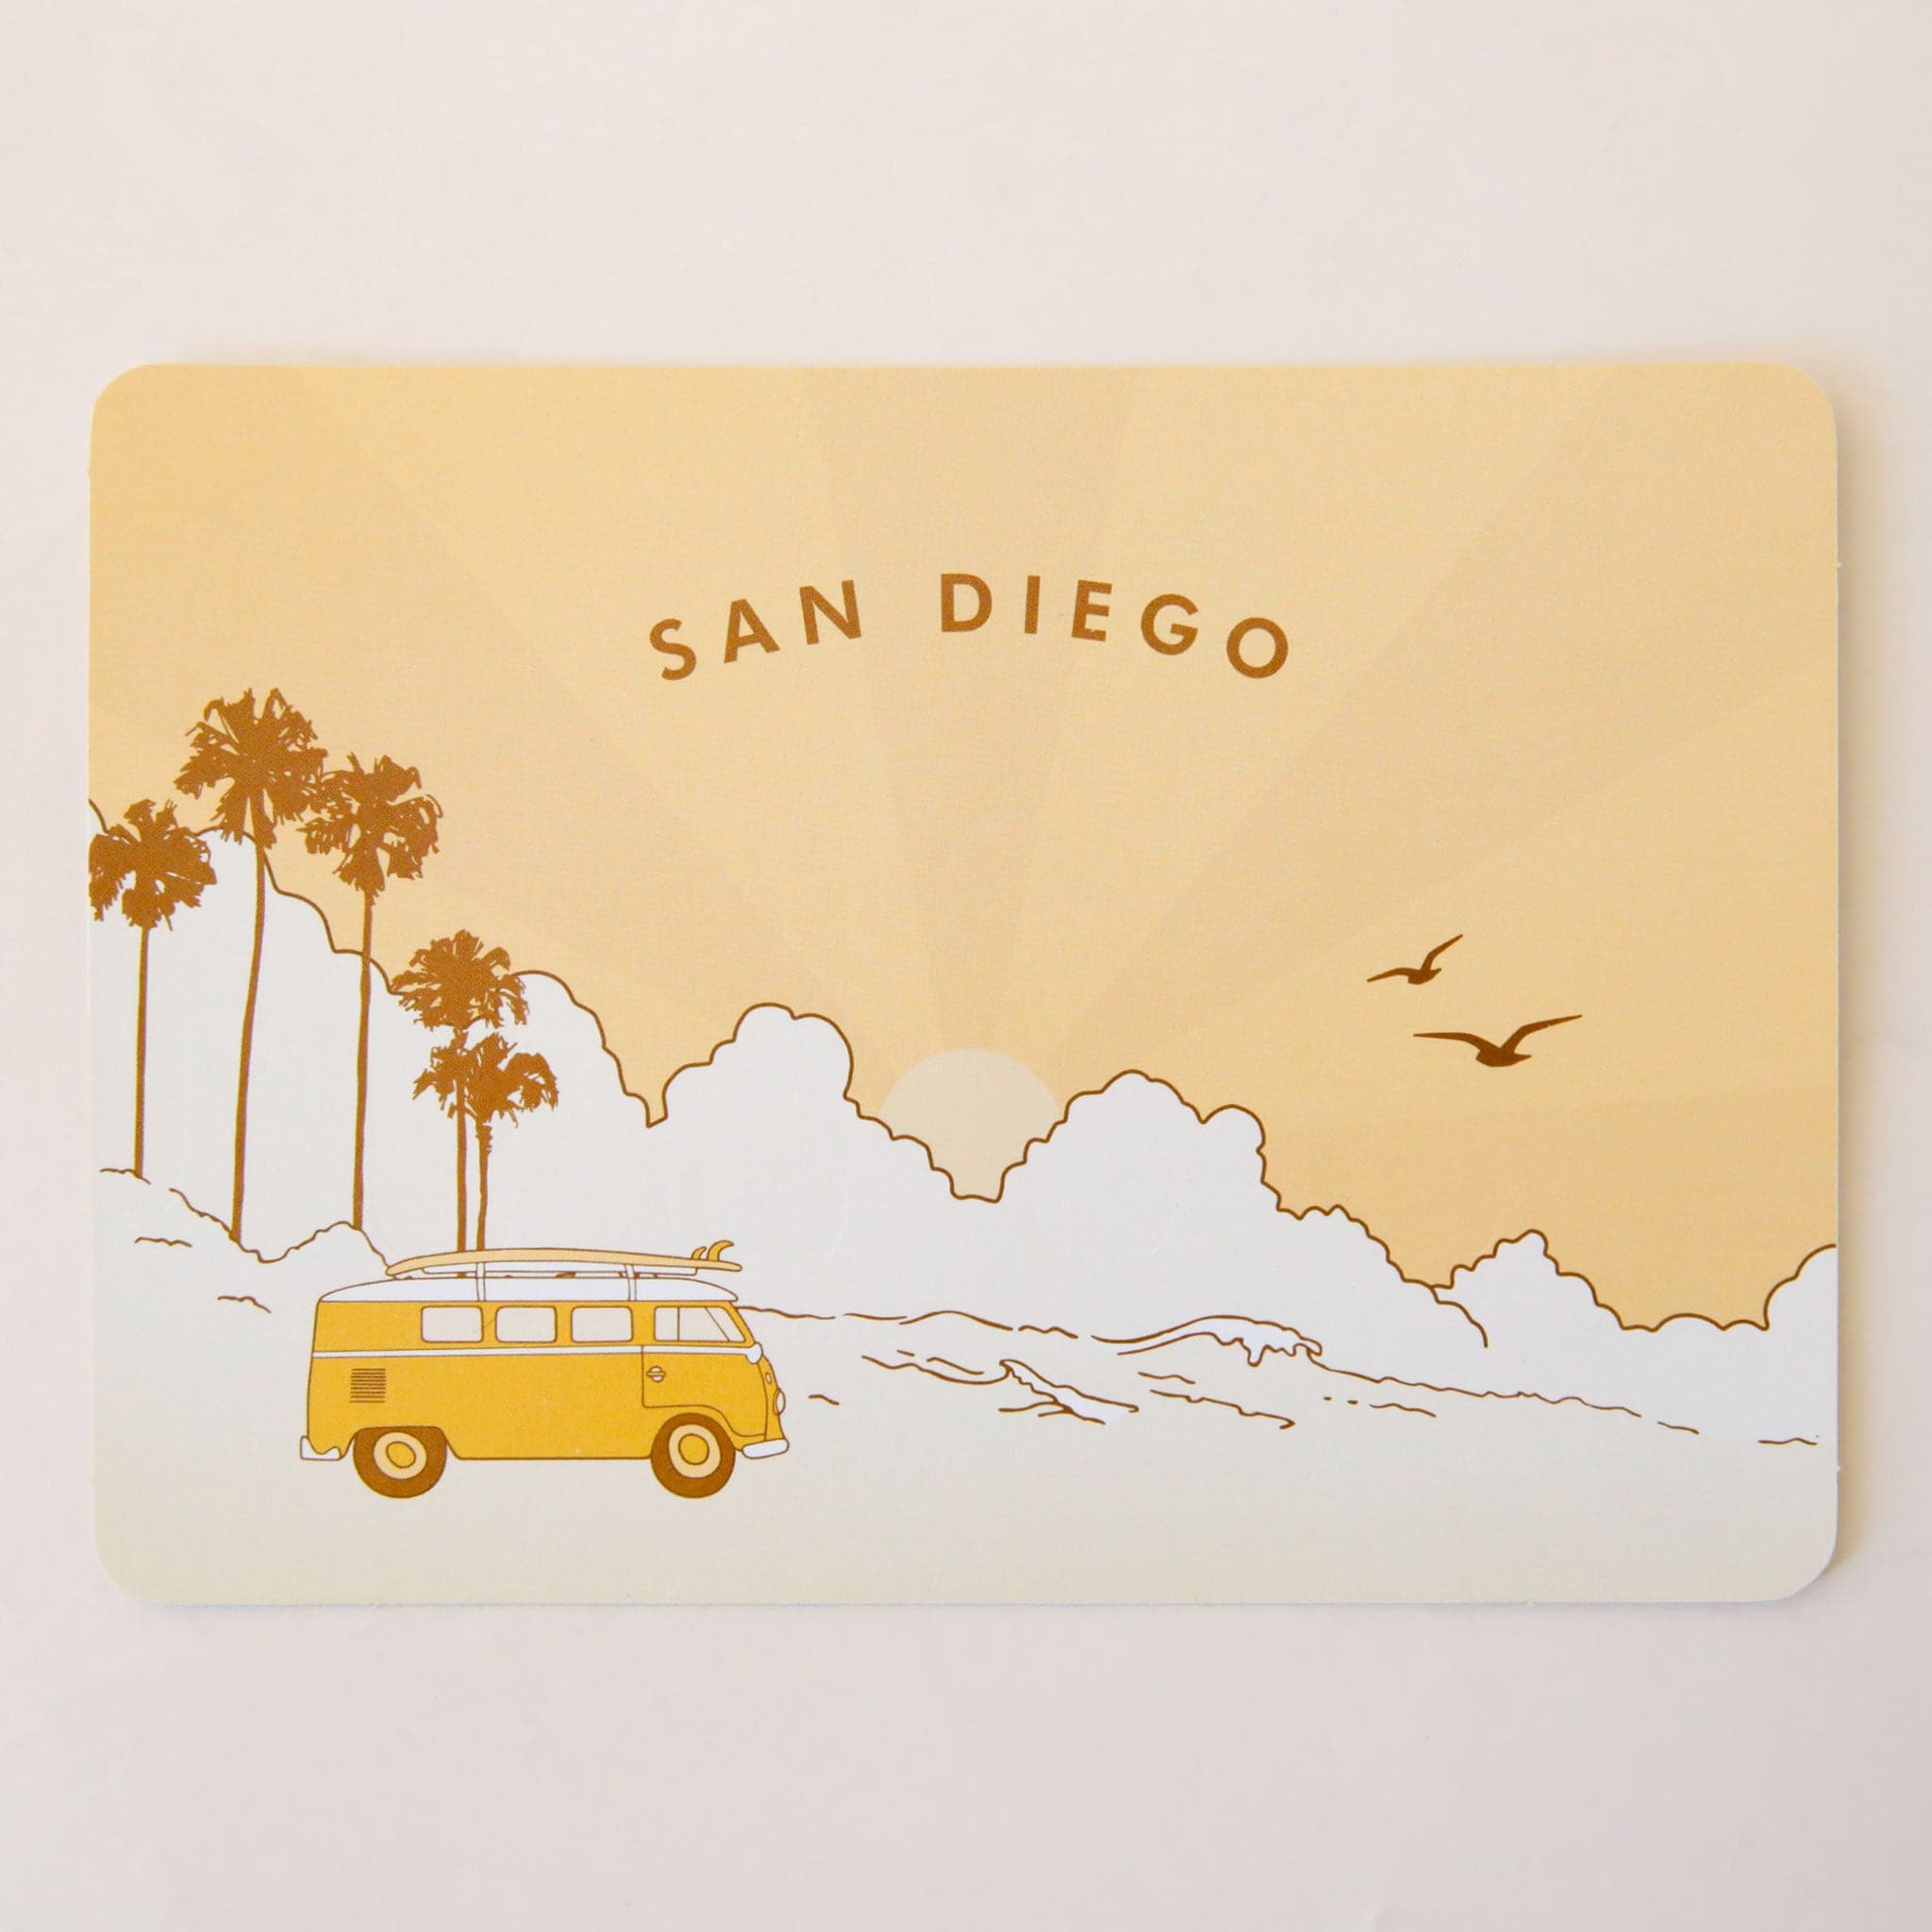 A yellow and cream postcard with a San Diego beach graphic design with palm trees and birds in the background along with a bright yellow VW bus that has a surf board on top as well as text curved along the top that reads, "San Diego".